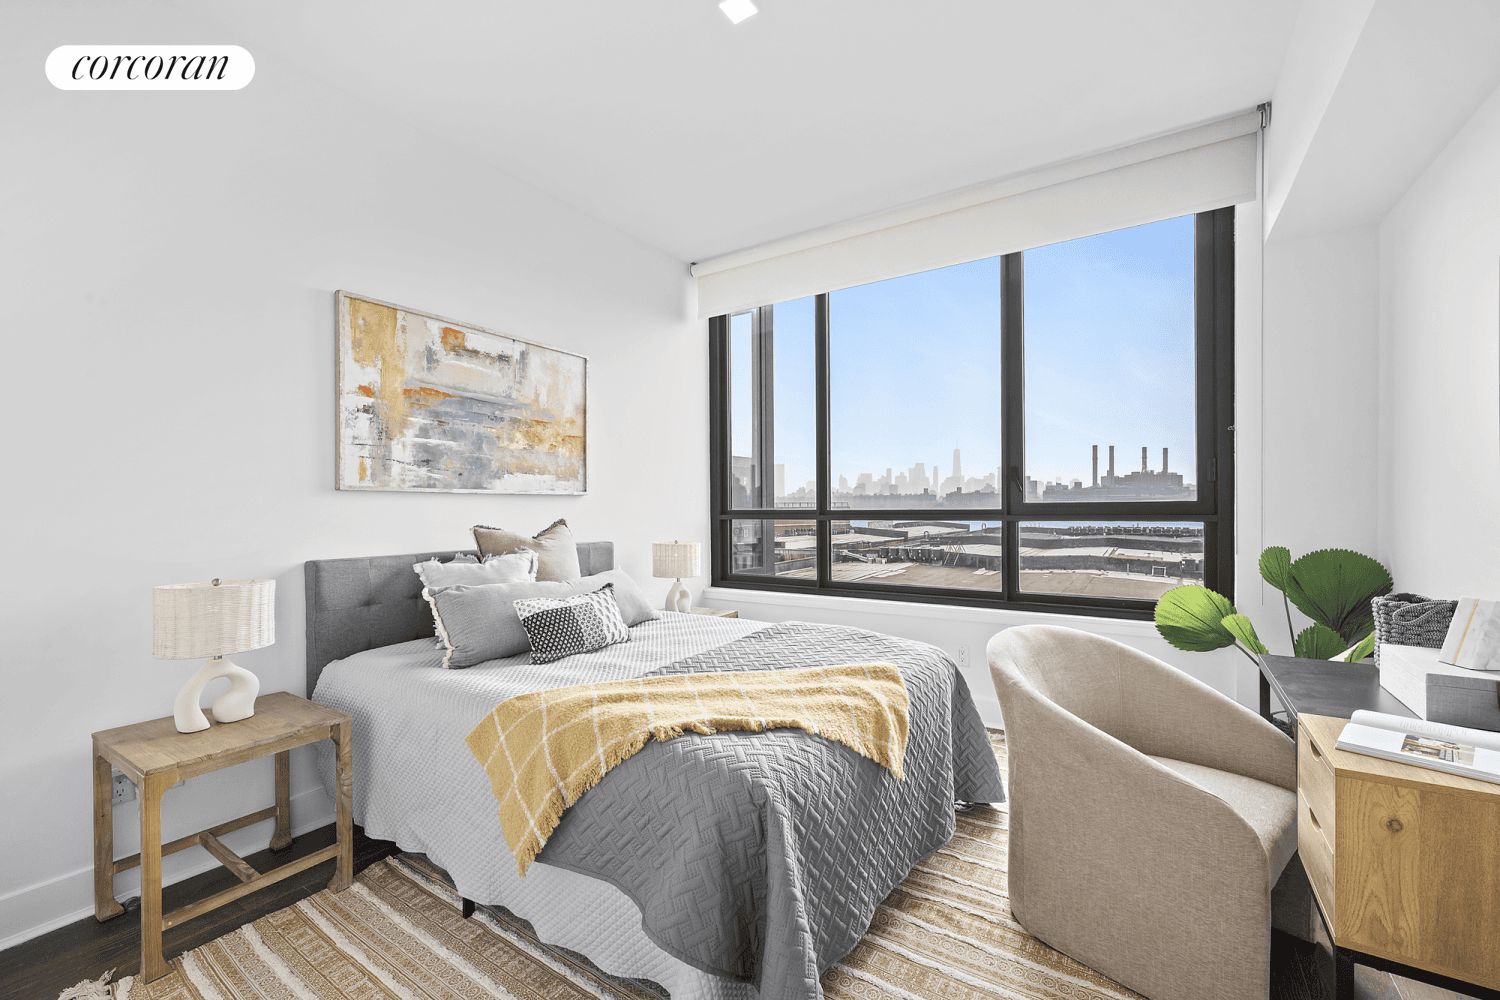 Come fall in love with this luxury home in Greenpoint, BrooklynUnit 5D at 50 Greenpoint is a spacious duplex two bedroom home boasting double height ceilings and a wall of ...